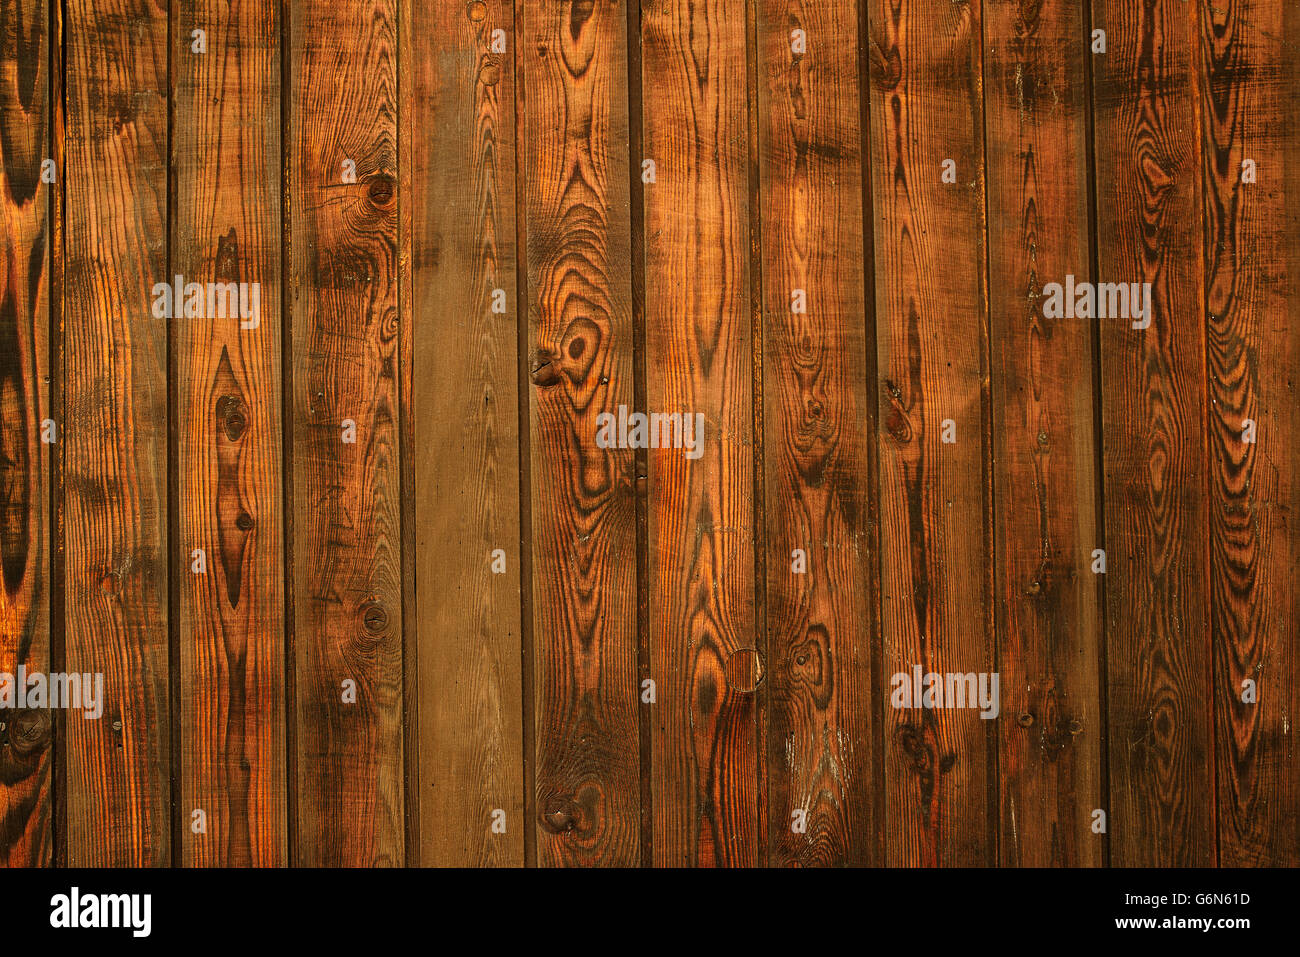 Rustic brown wood texture, weathered wooden planks Stock Photo